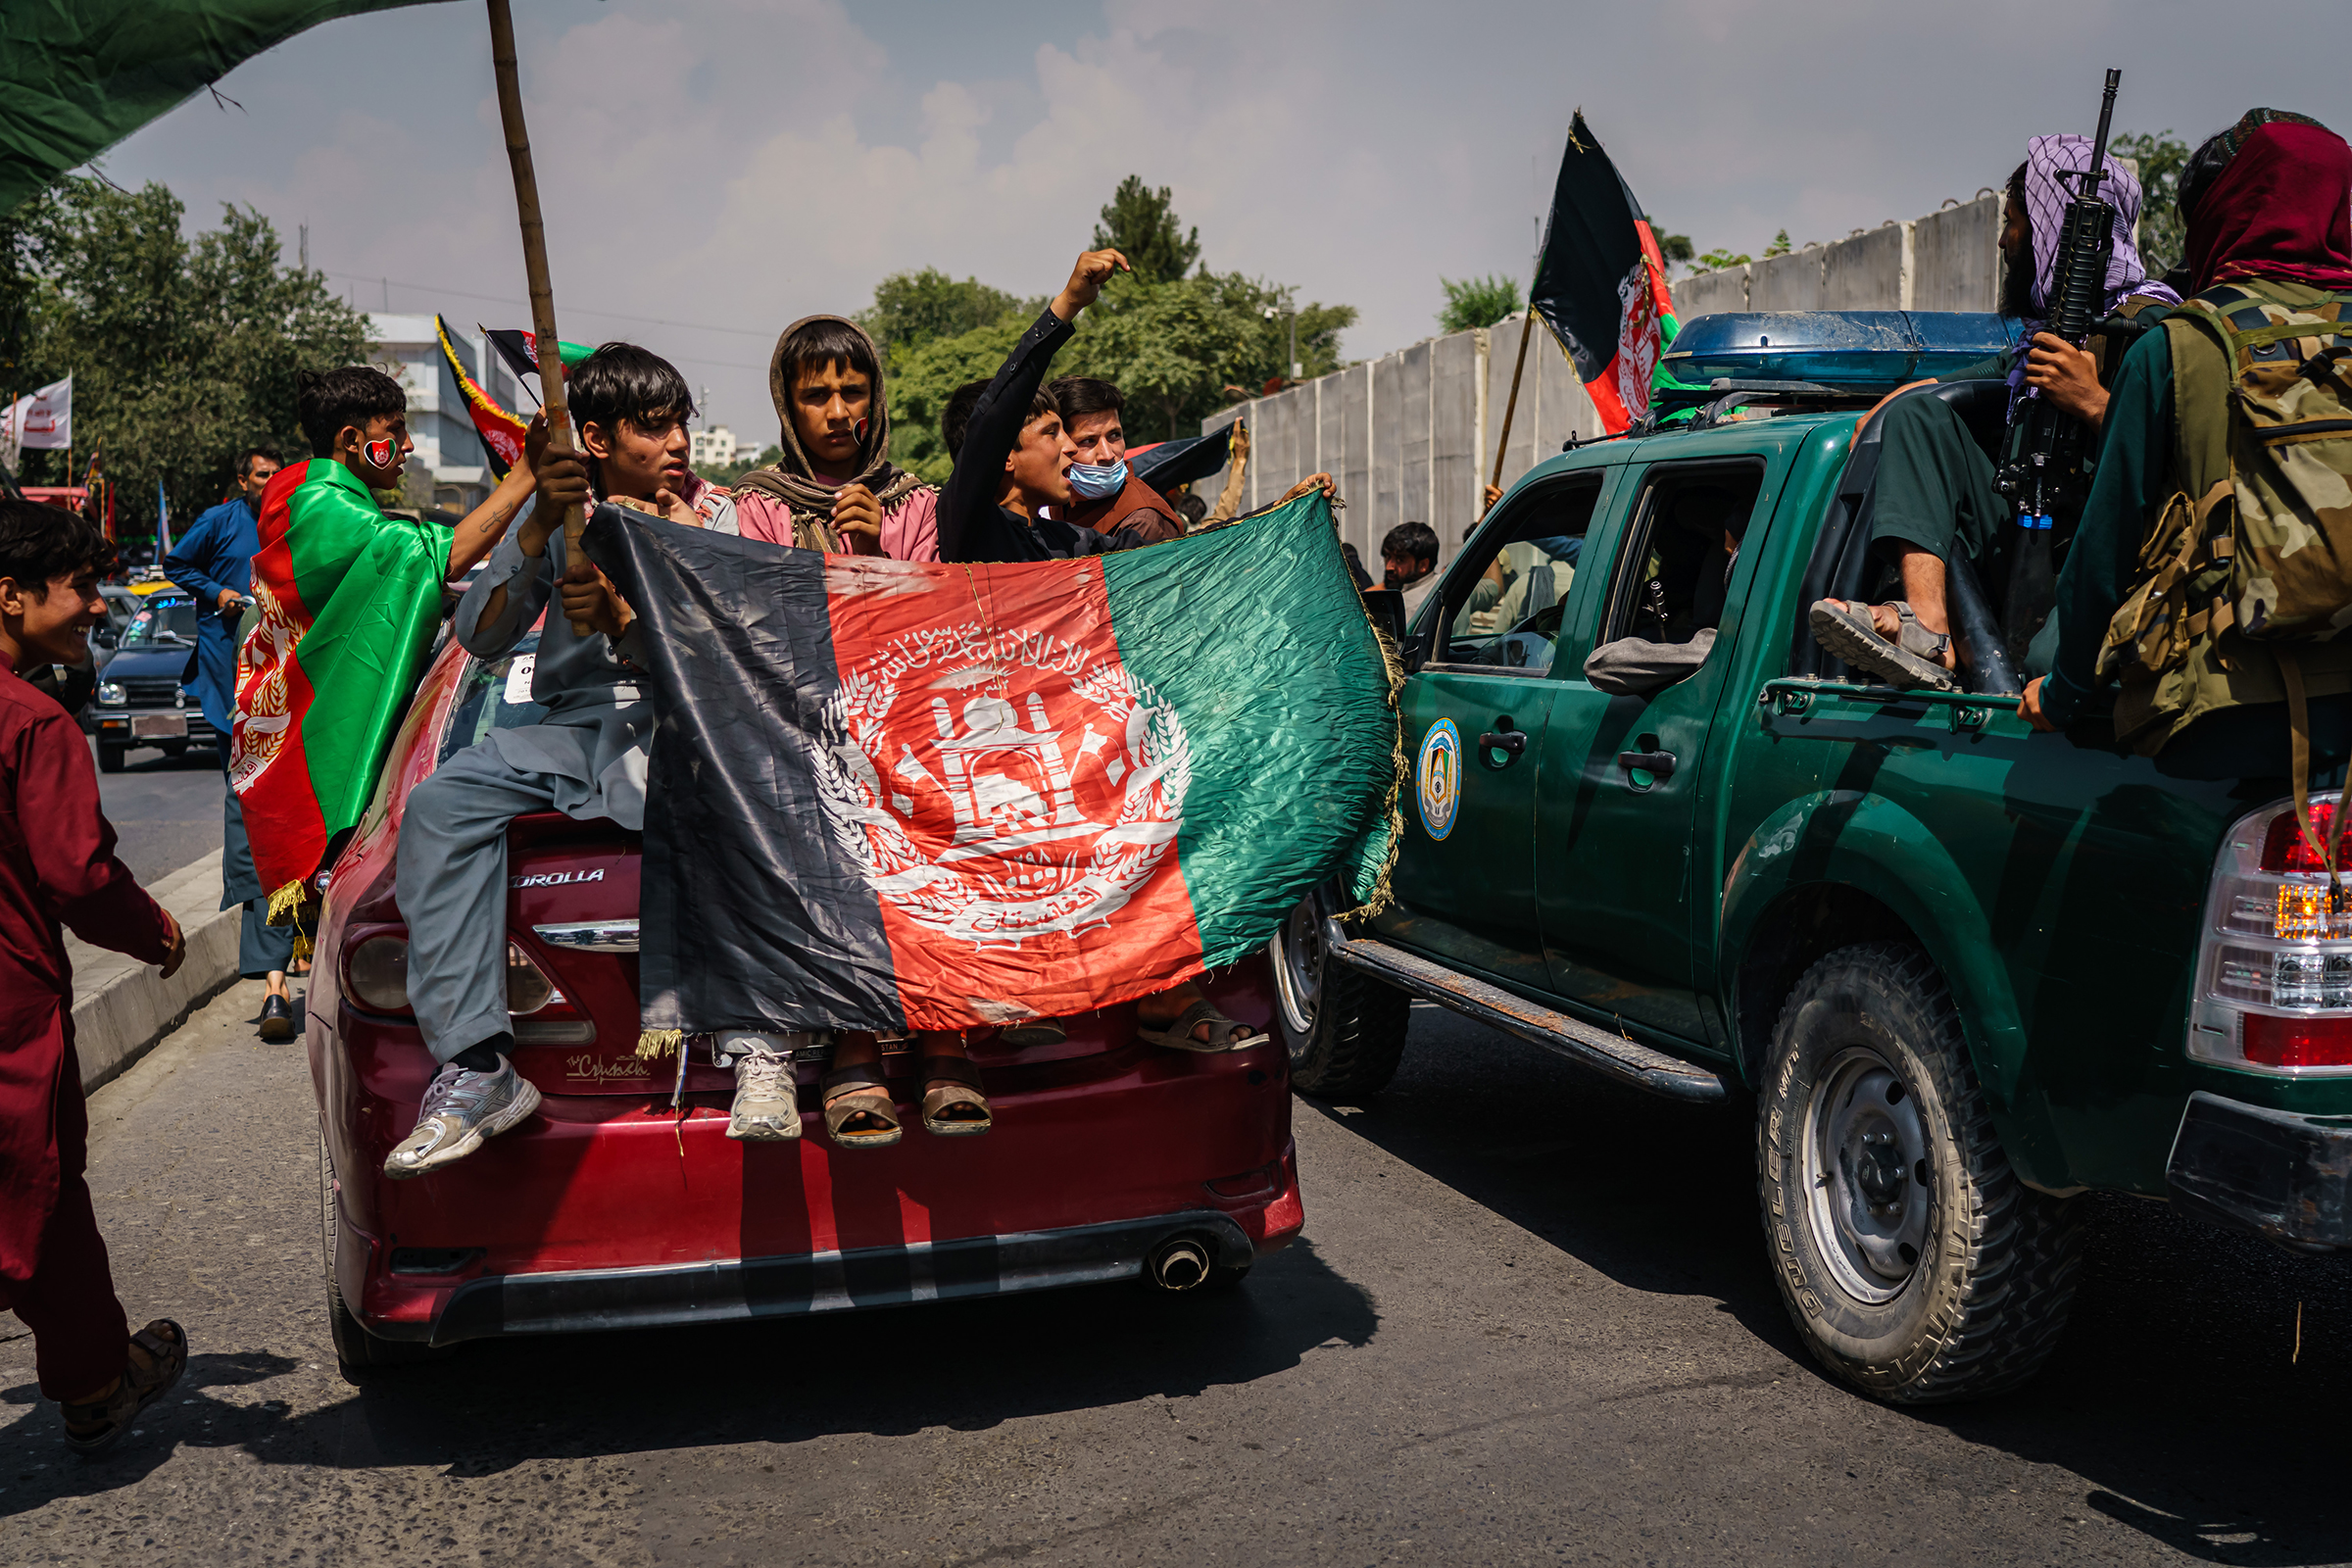 Afghans march while carrying banners and the flag of the Islamic Republic of Afghanistan, despite the presence of Taliban fighters, in Kabul on Aug. 19. (Marcus Yam—Los Angeles Times/Getty Images)